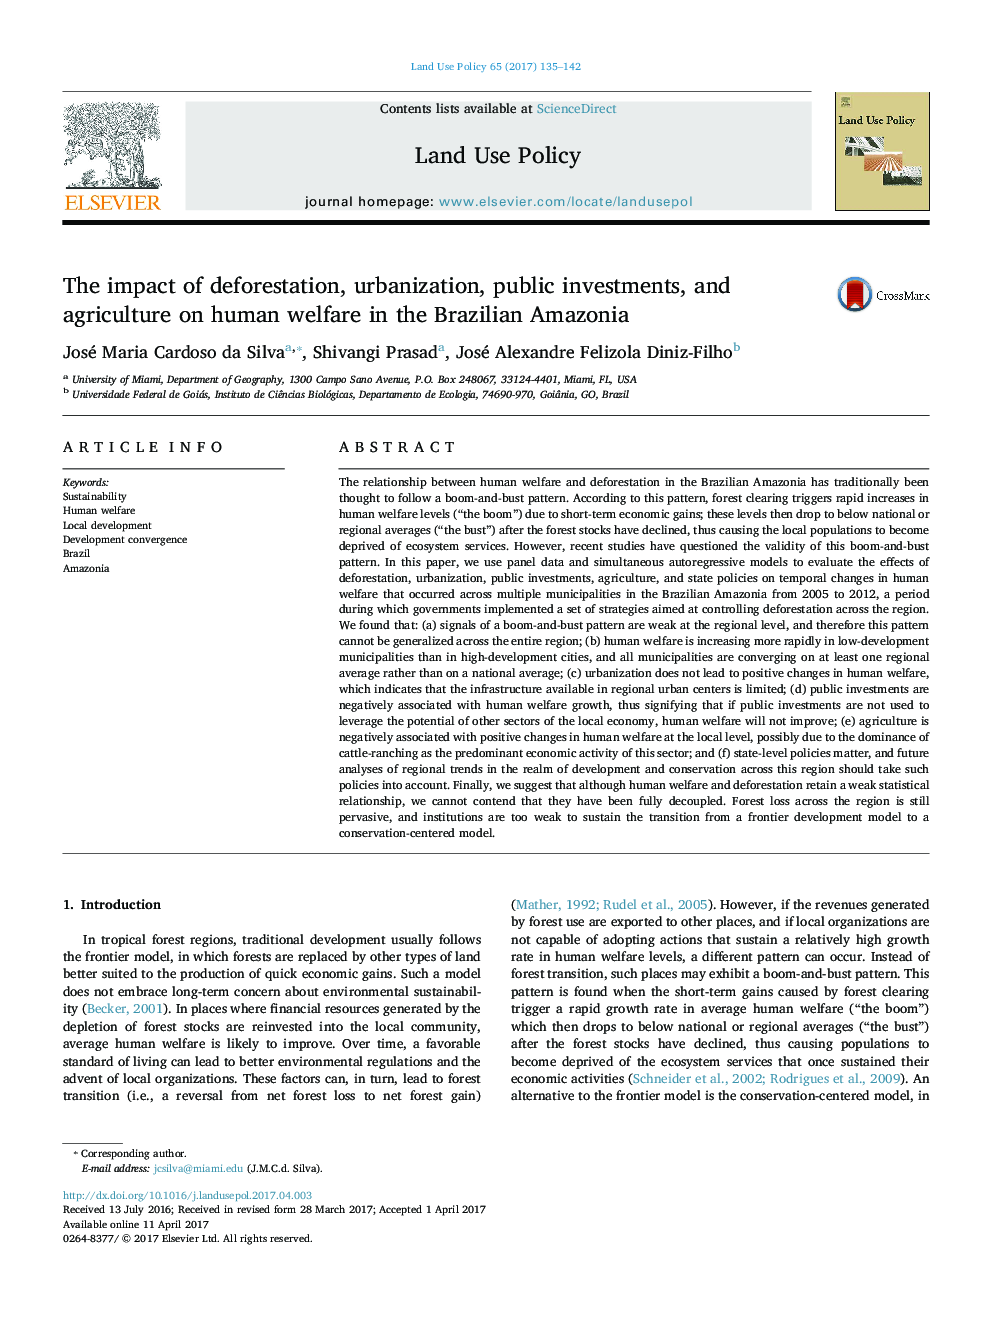 The impact of deforestation, urbanization, public investments, and agriculture on human welfare in the Brazilian Amazonia